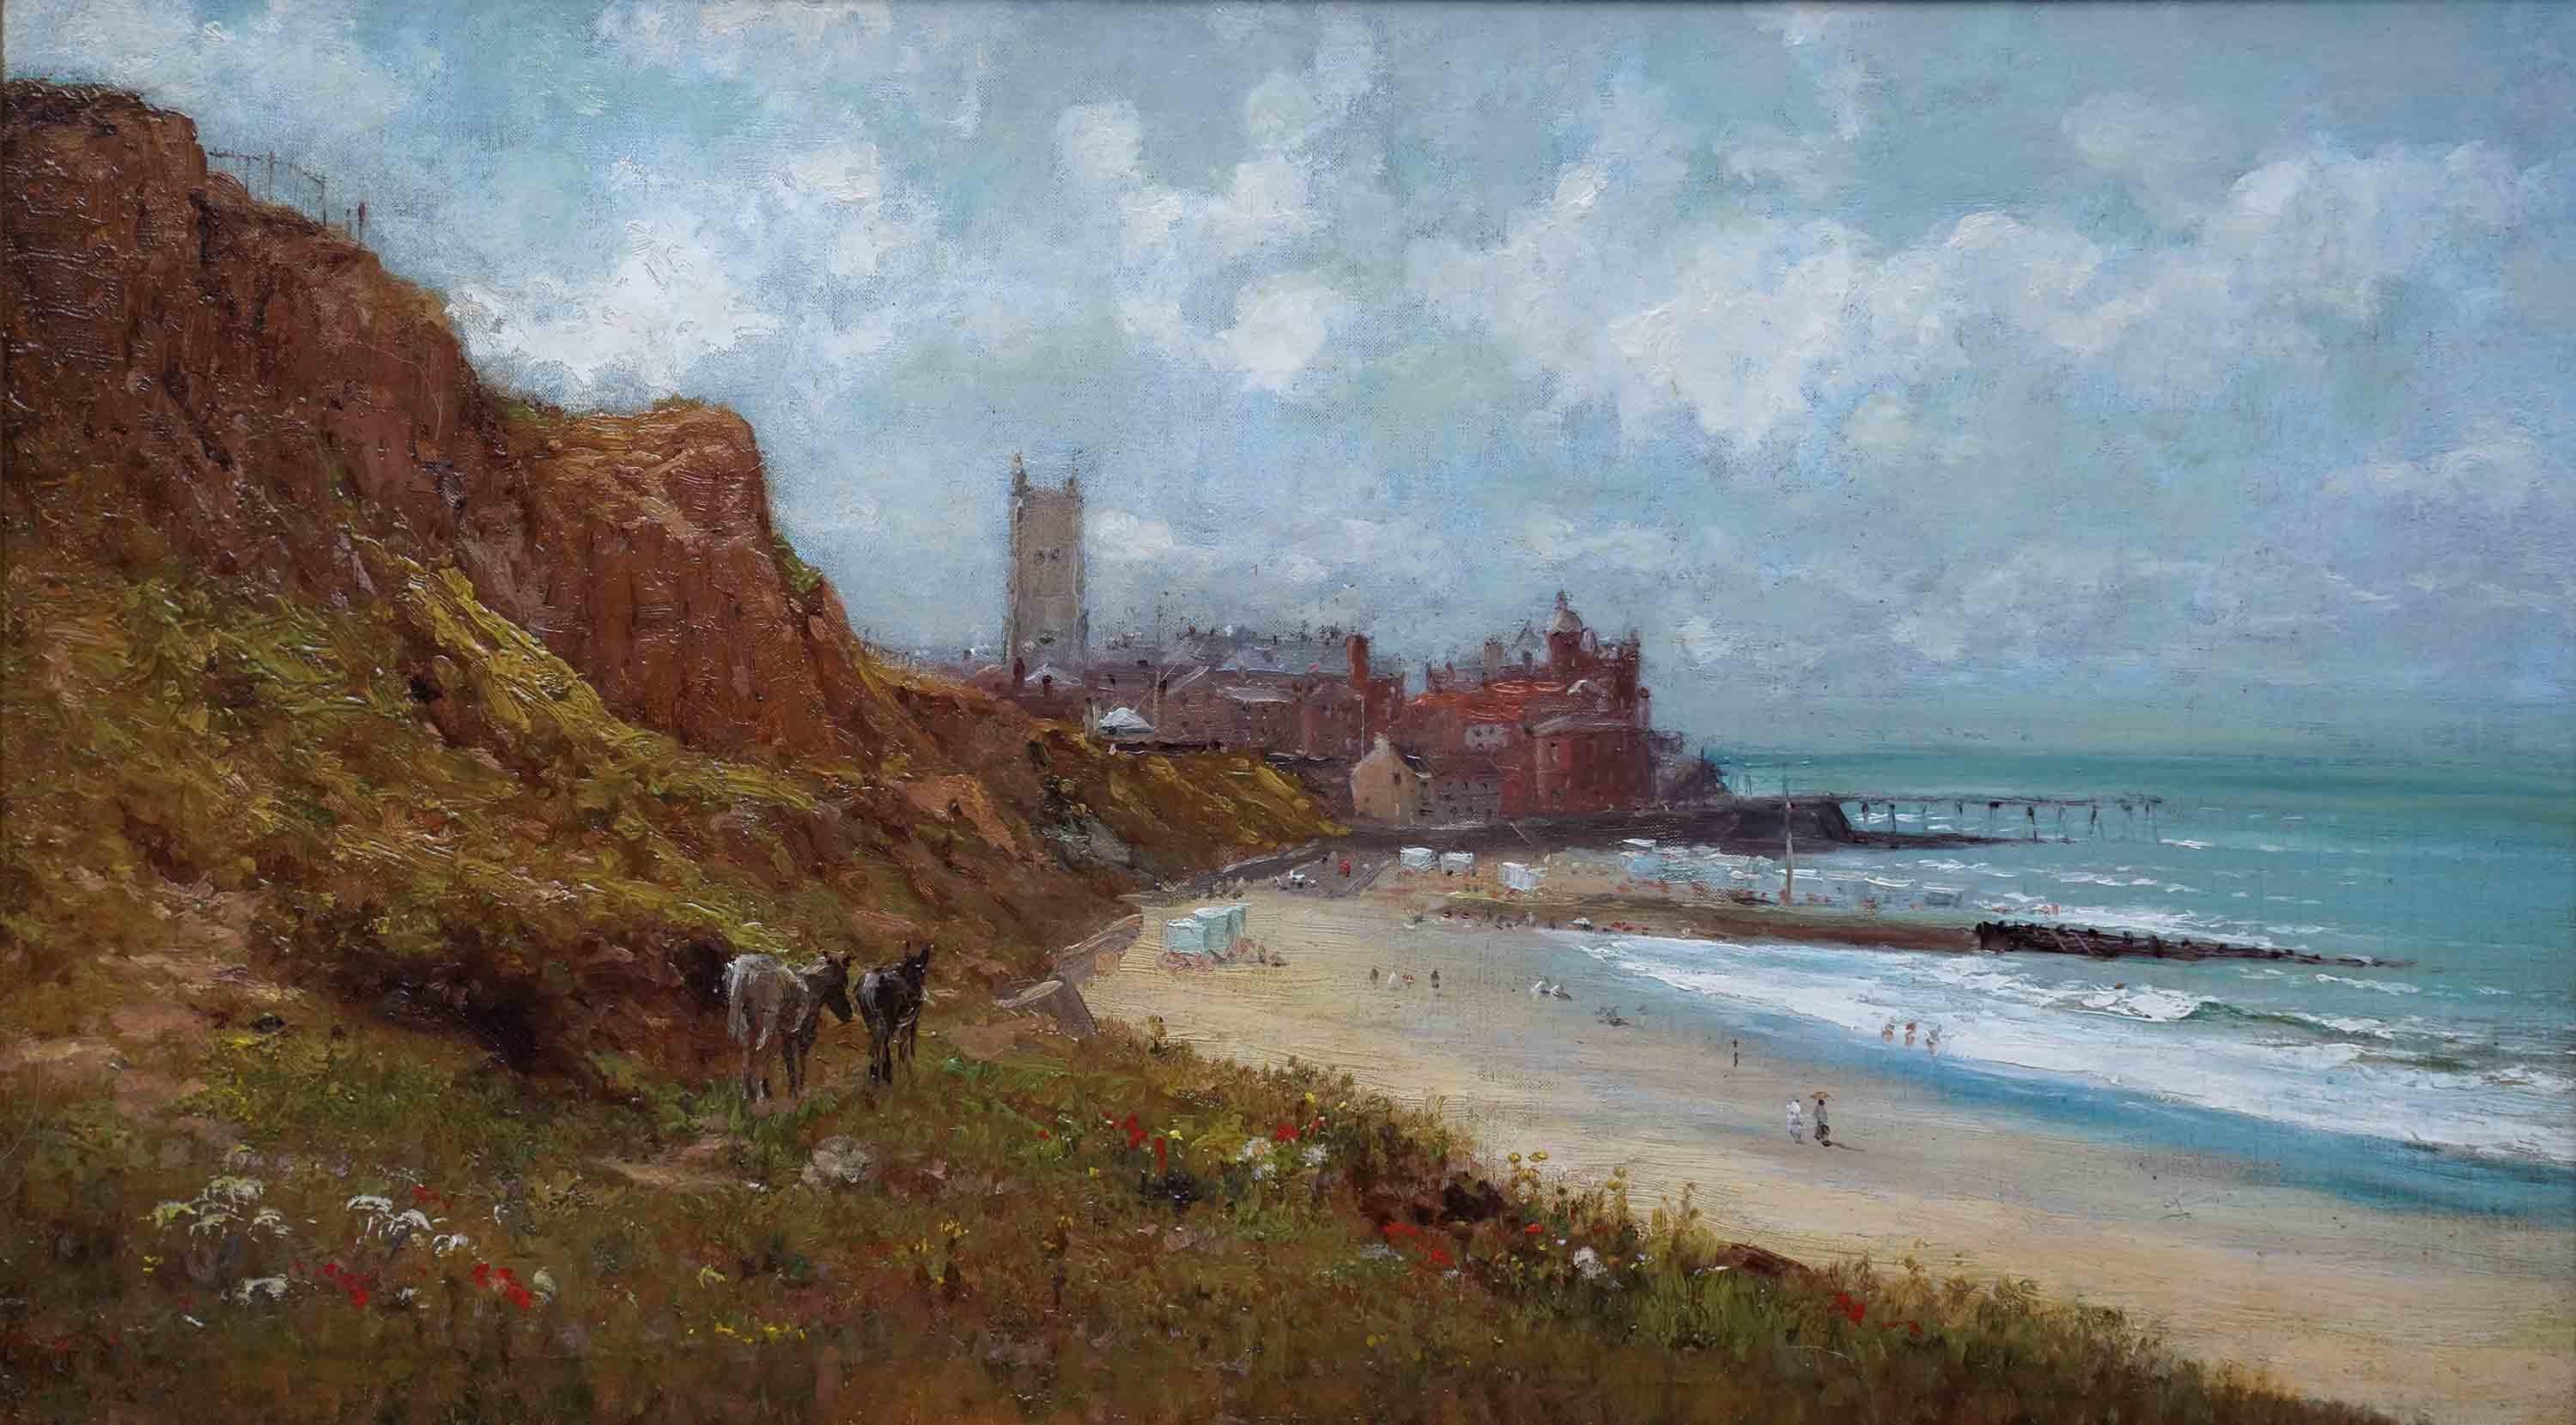 Cromer Coastal Landscape with Donkeys - British 19th century art oil painting - Painting by Robert Finlay McIntrye